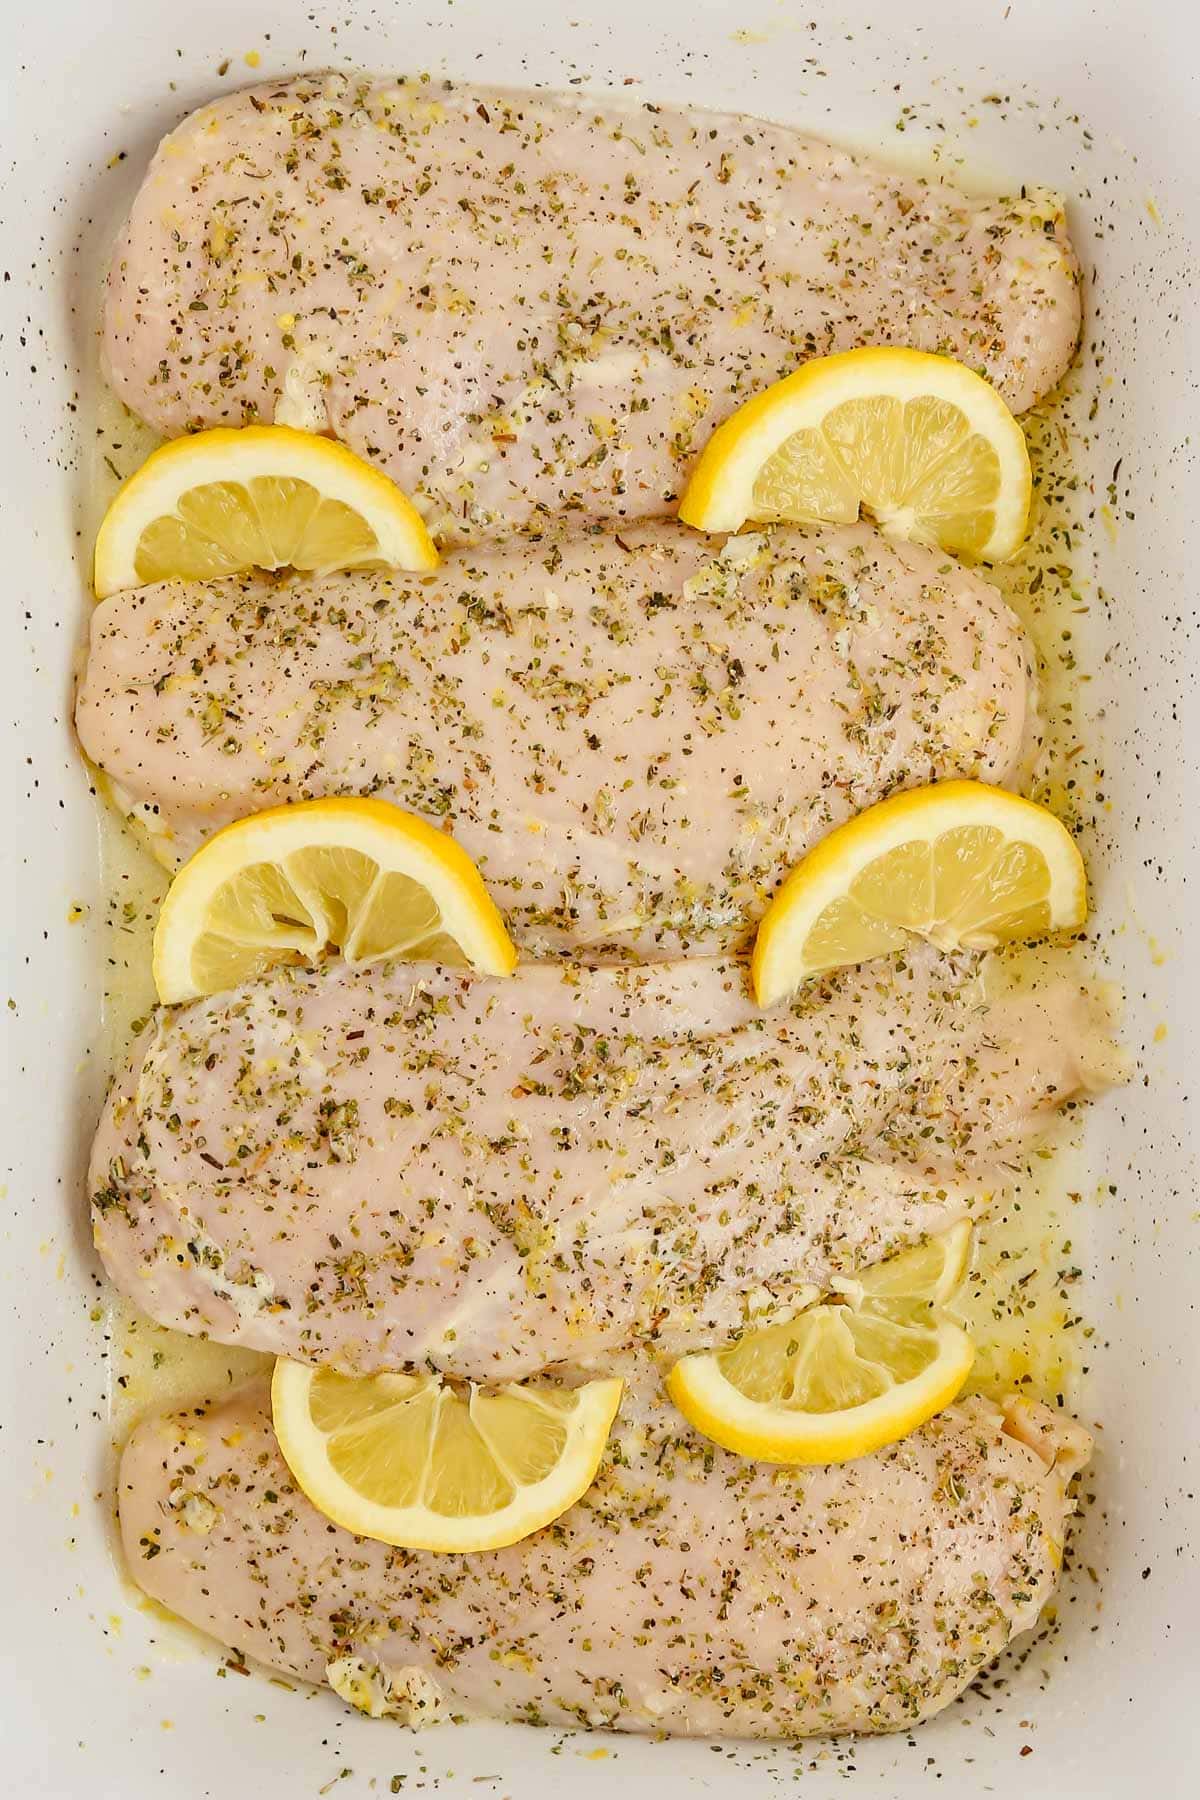 4 uncooked chicken breasts with lemon slices and seasoning.